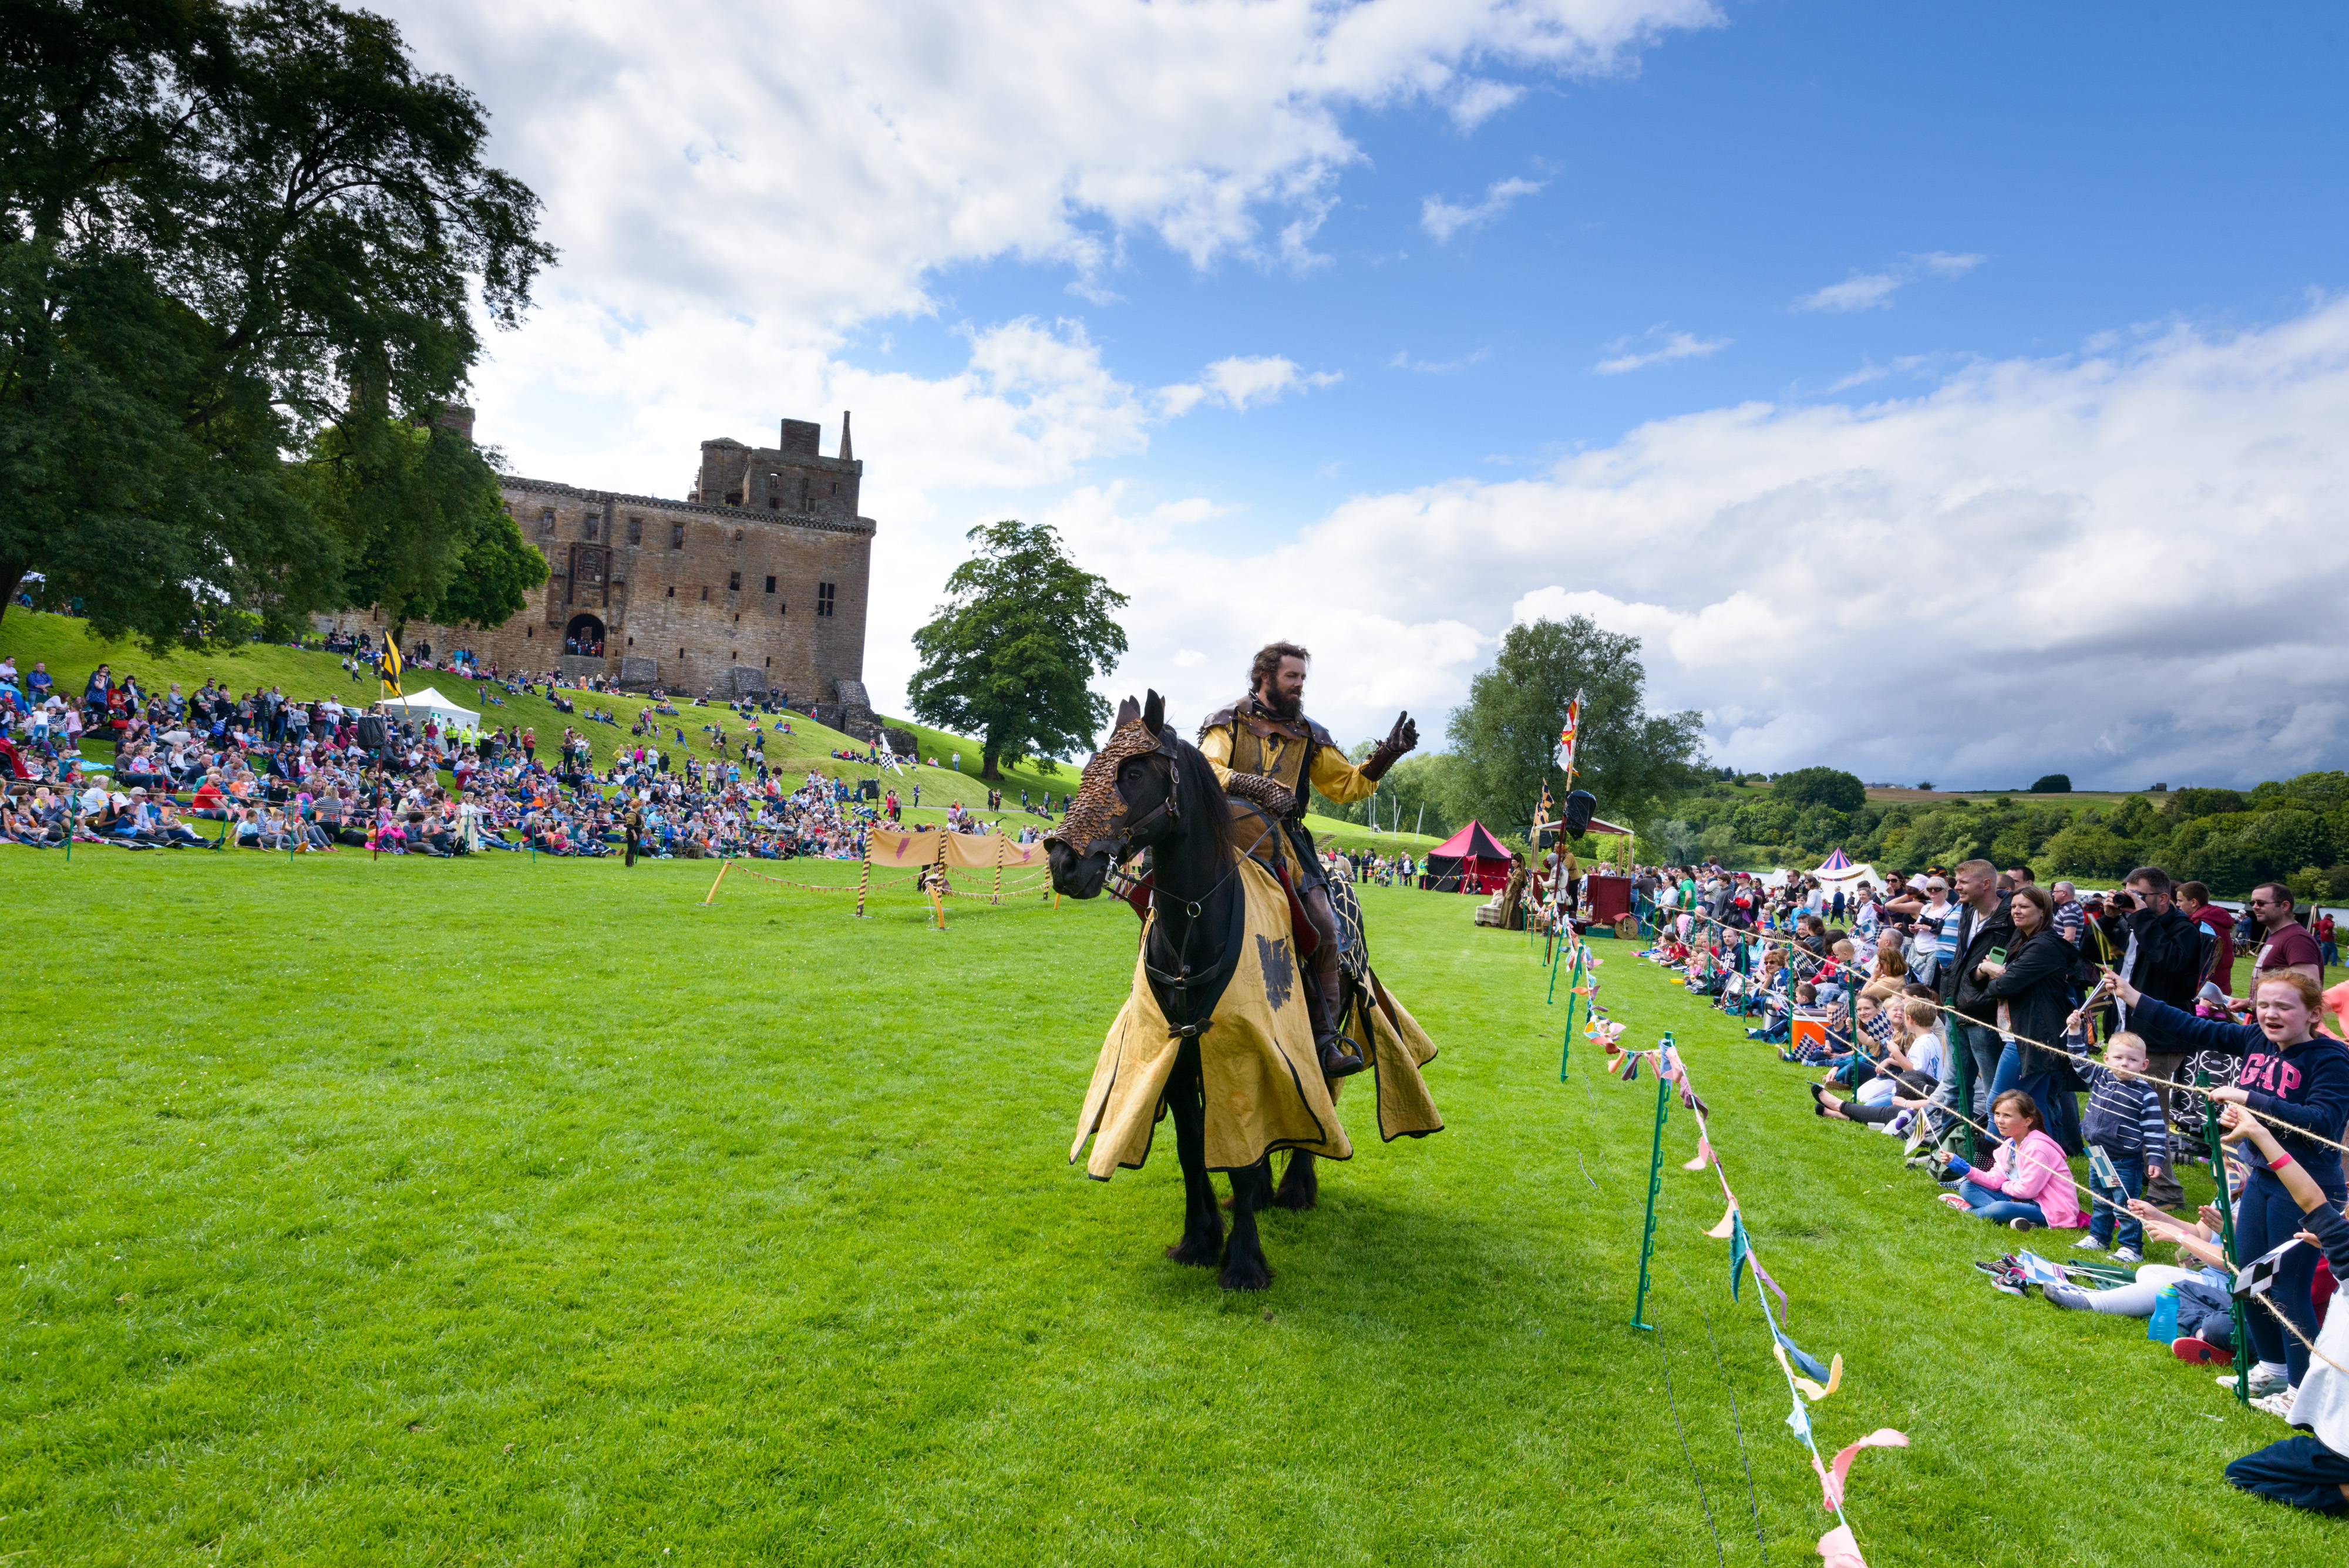 Jousting 2015 at Linlithgow Palace. Spectacular Jousting event and historical re-enactor in the living history camp. New company of jousters, Les Amis d'Onno.